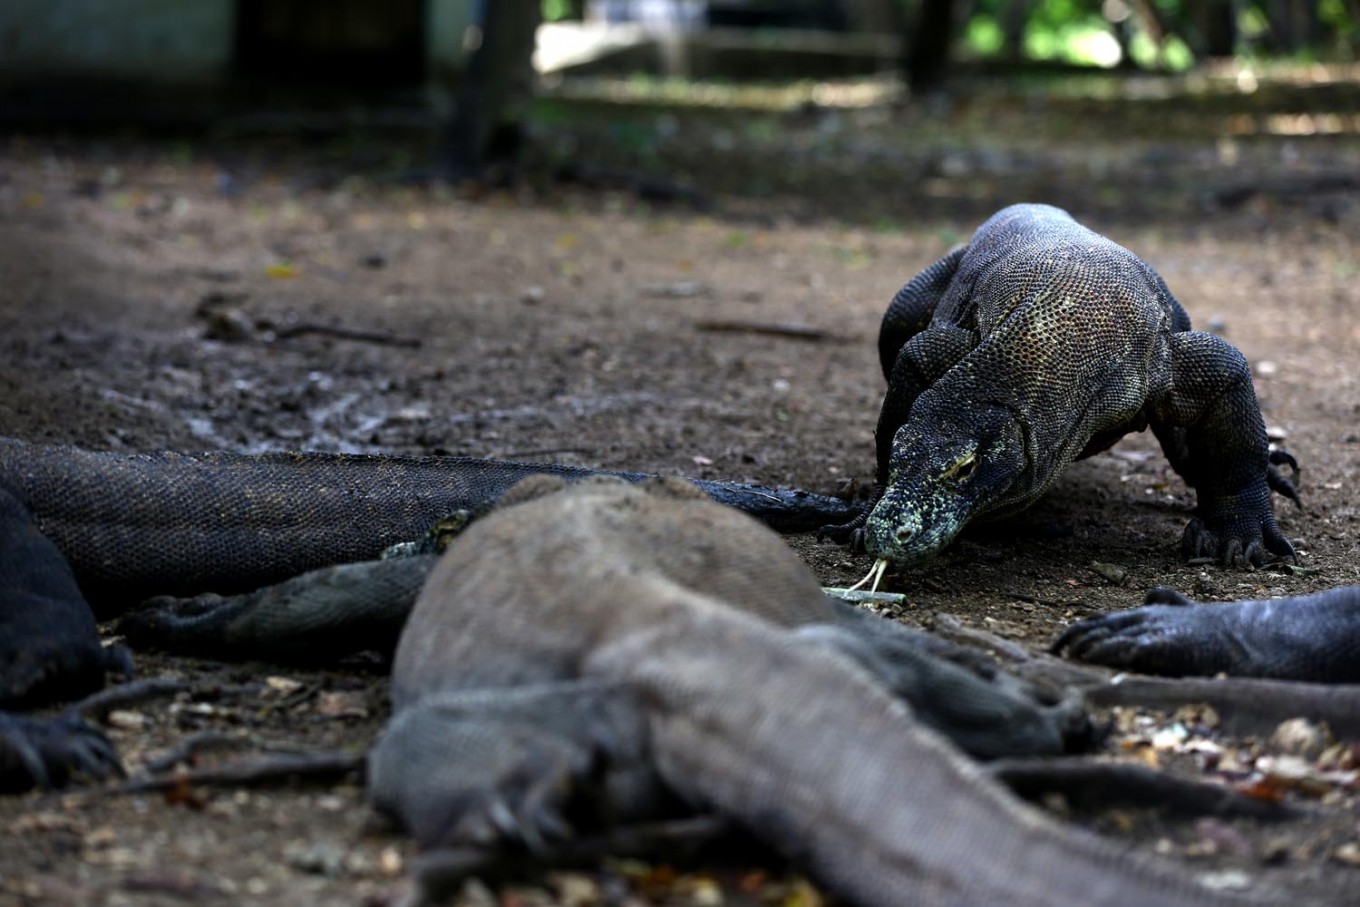 Indonesia’s Komodo National Park to be closed 1 year for habitat restoration